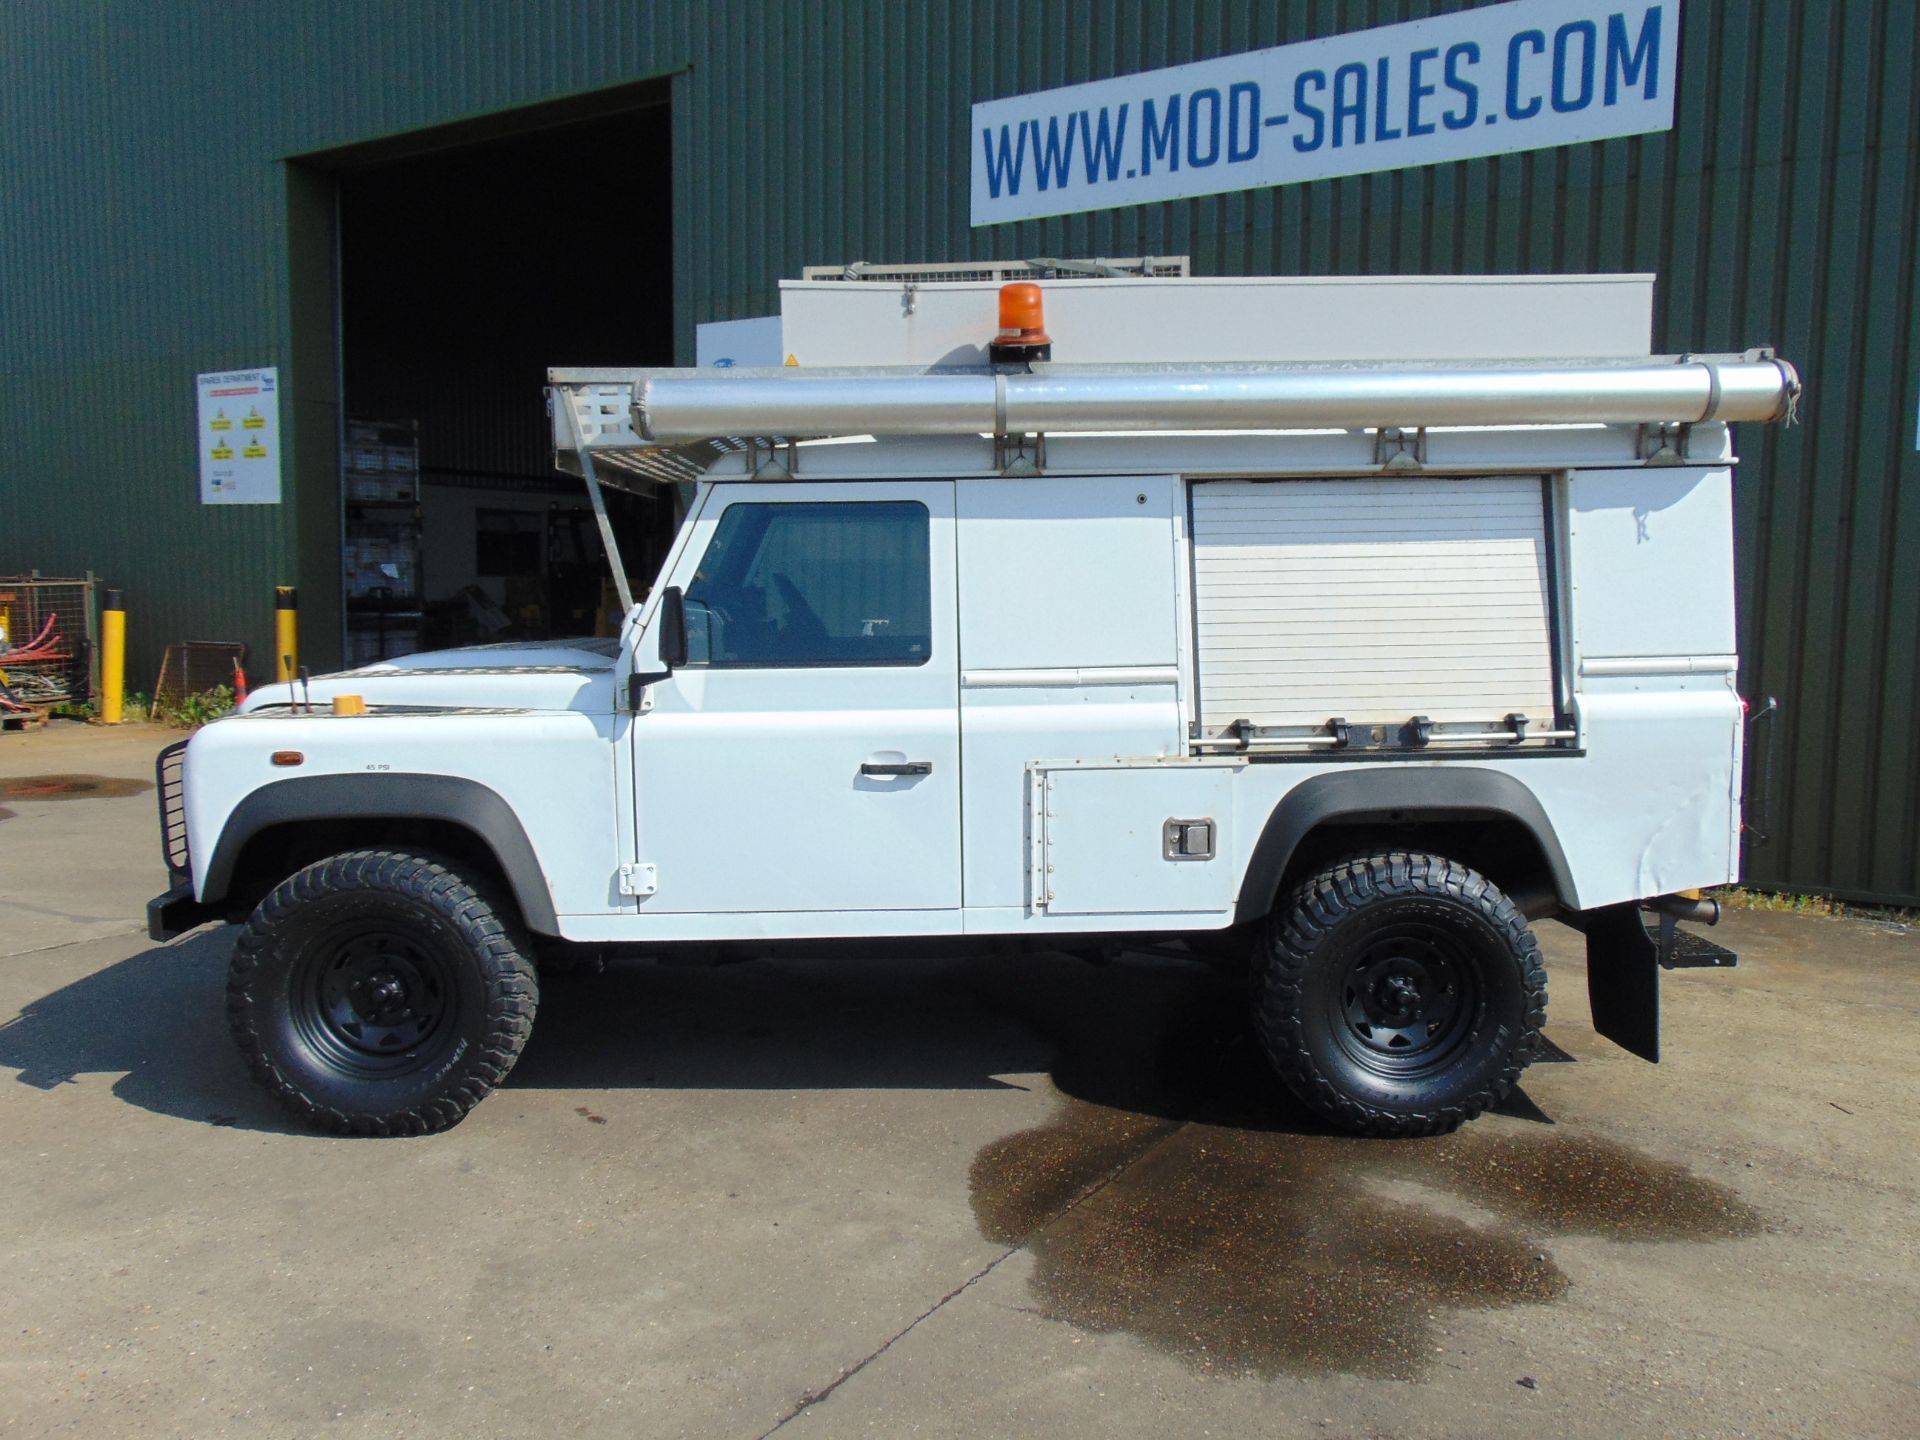 2011 Land Rover Defender 110 Puma hardtop 4x4 Utility vehicle (mobile workshop) with hydraulic winch - Image 7 of 53